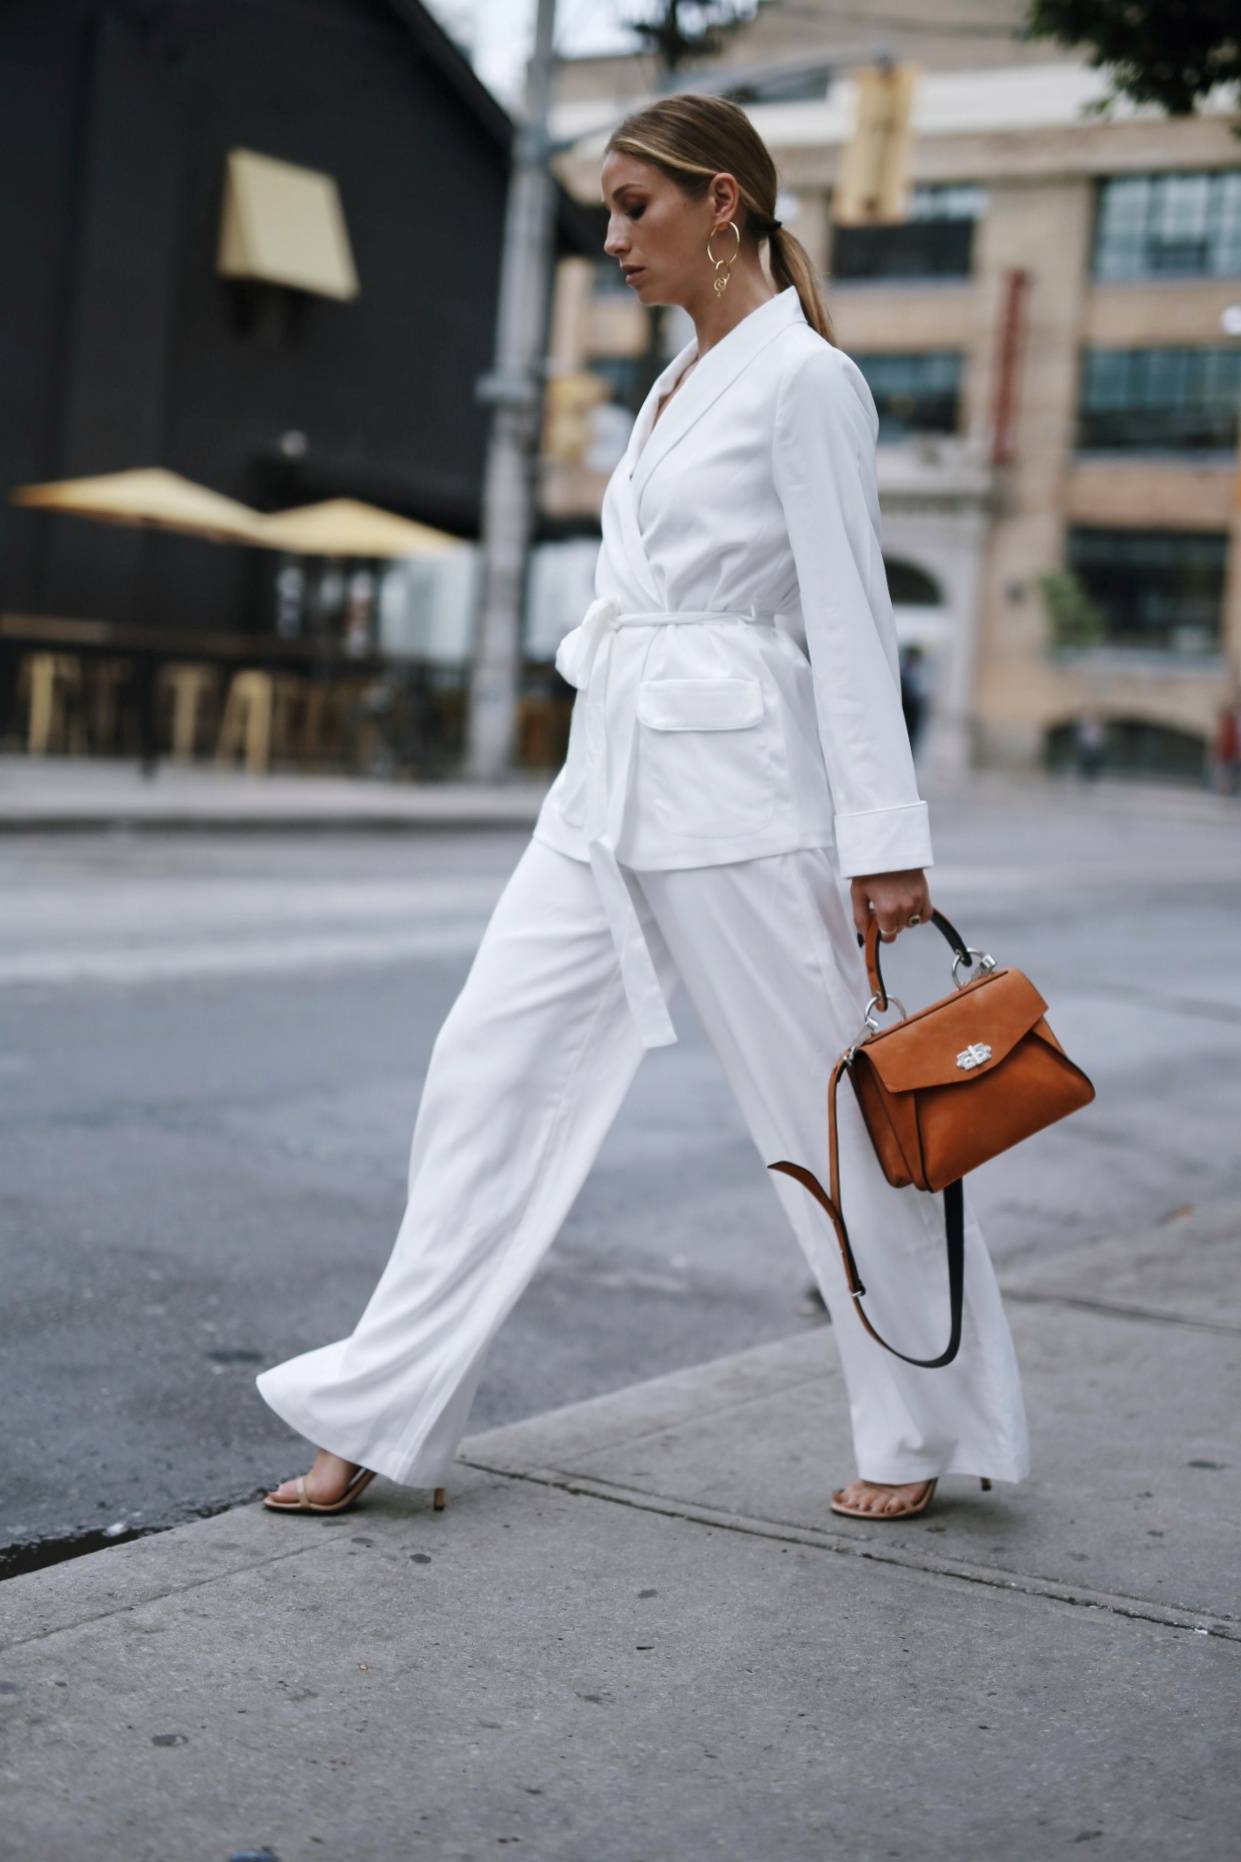 Style and beauty blogger Jill Lansky of The August Diaries wearing a white silk suit, brown proenza schouler bag